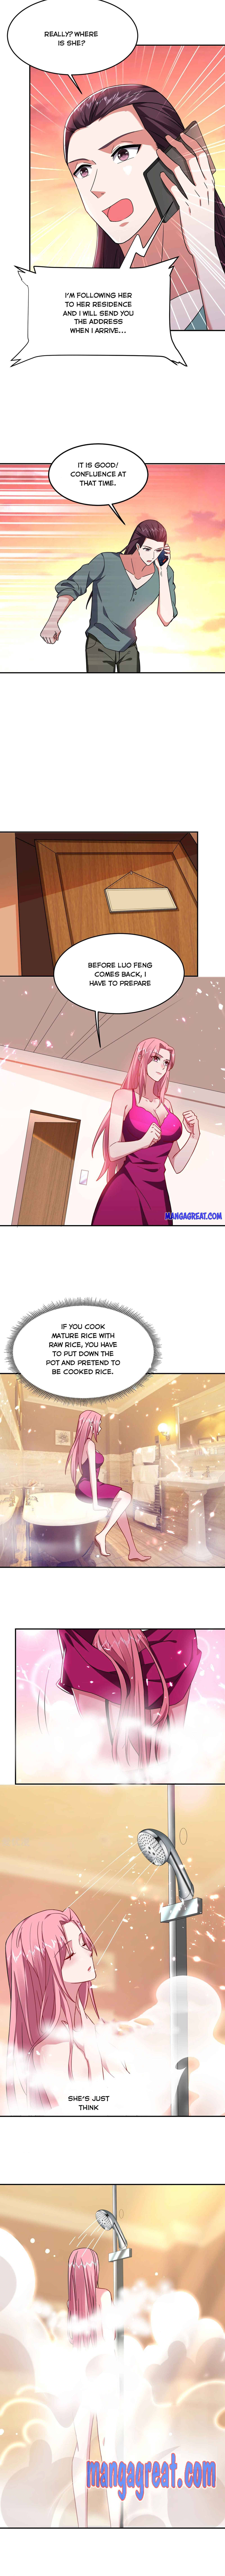 Wife Is School Goddess - Page 3